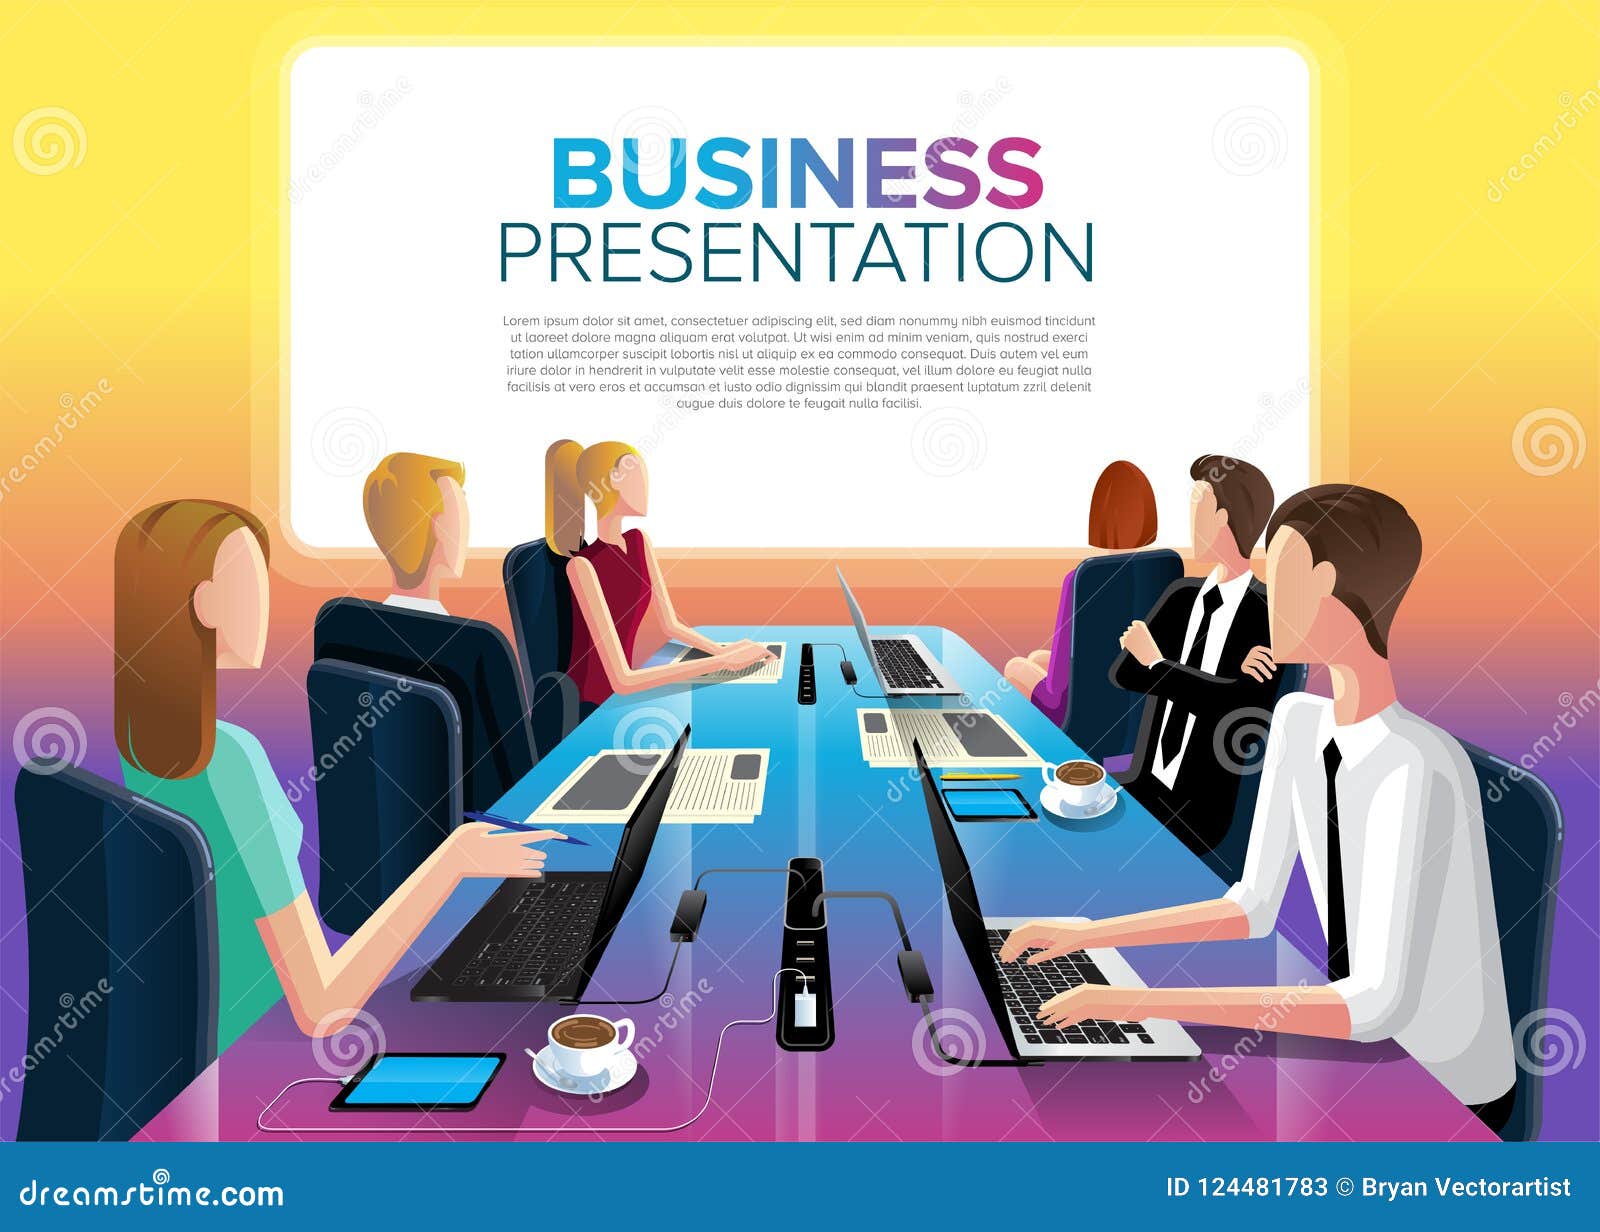 Business Meeting Clip Art Stock Illustrations – 6,961 Business Meeting Clip  Art Stock Illustrations, Vectors & Clipart - Dreamstime